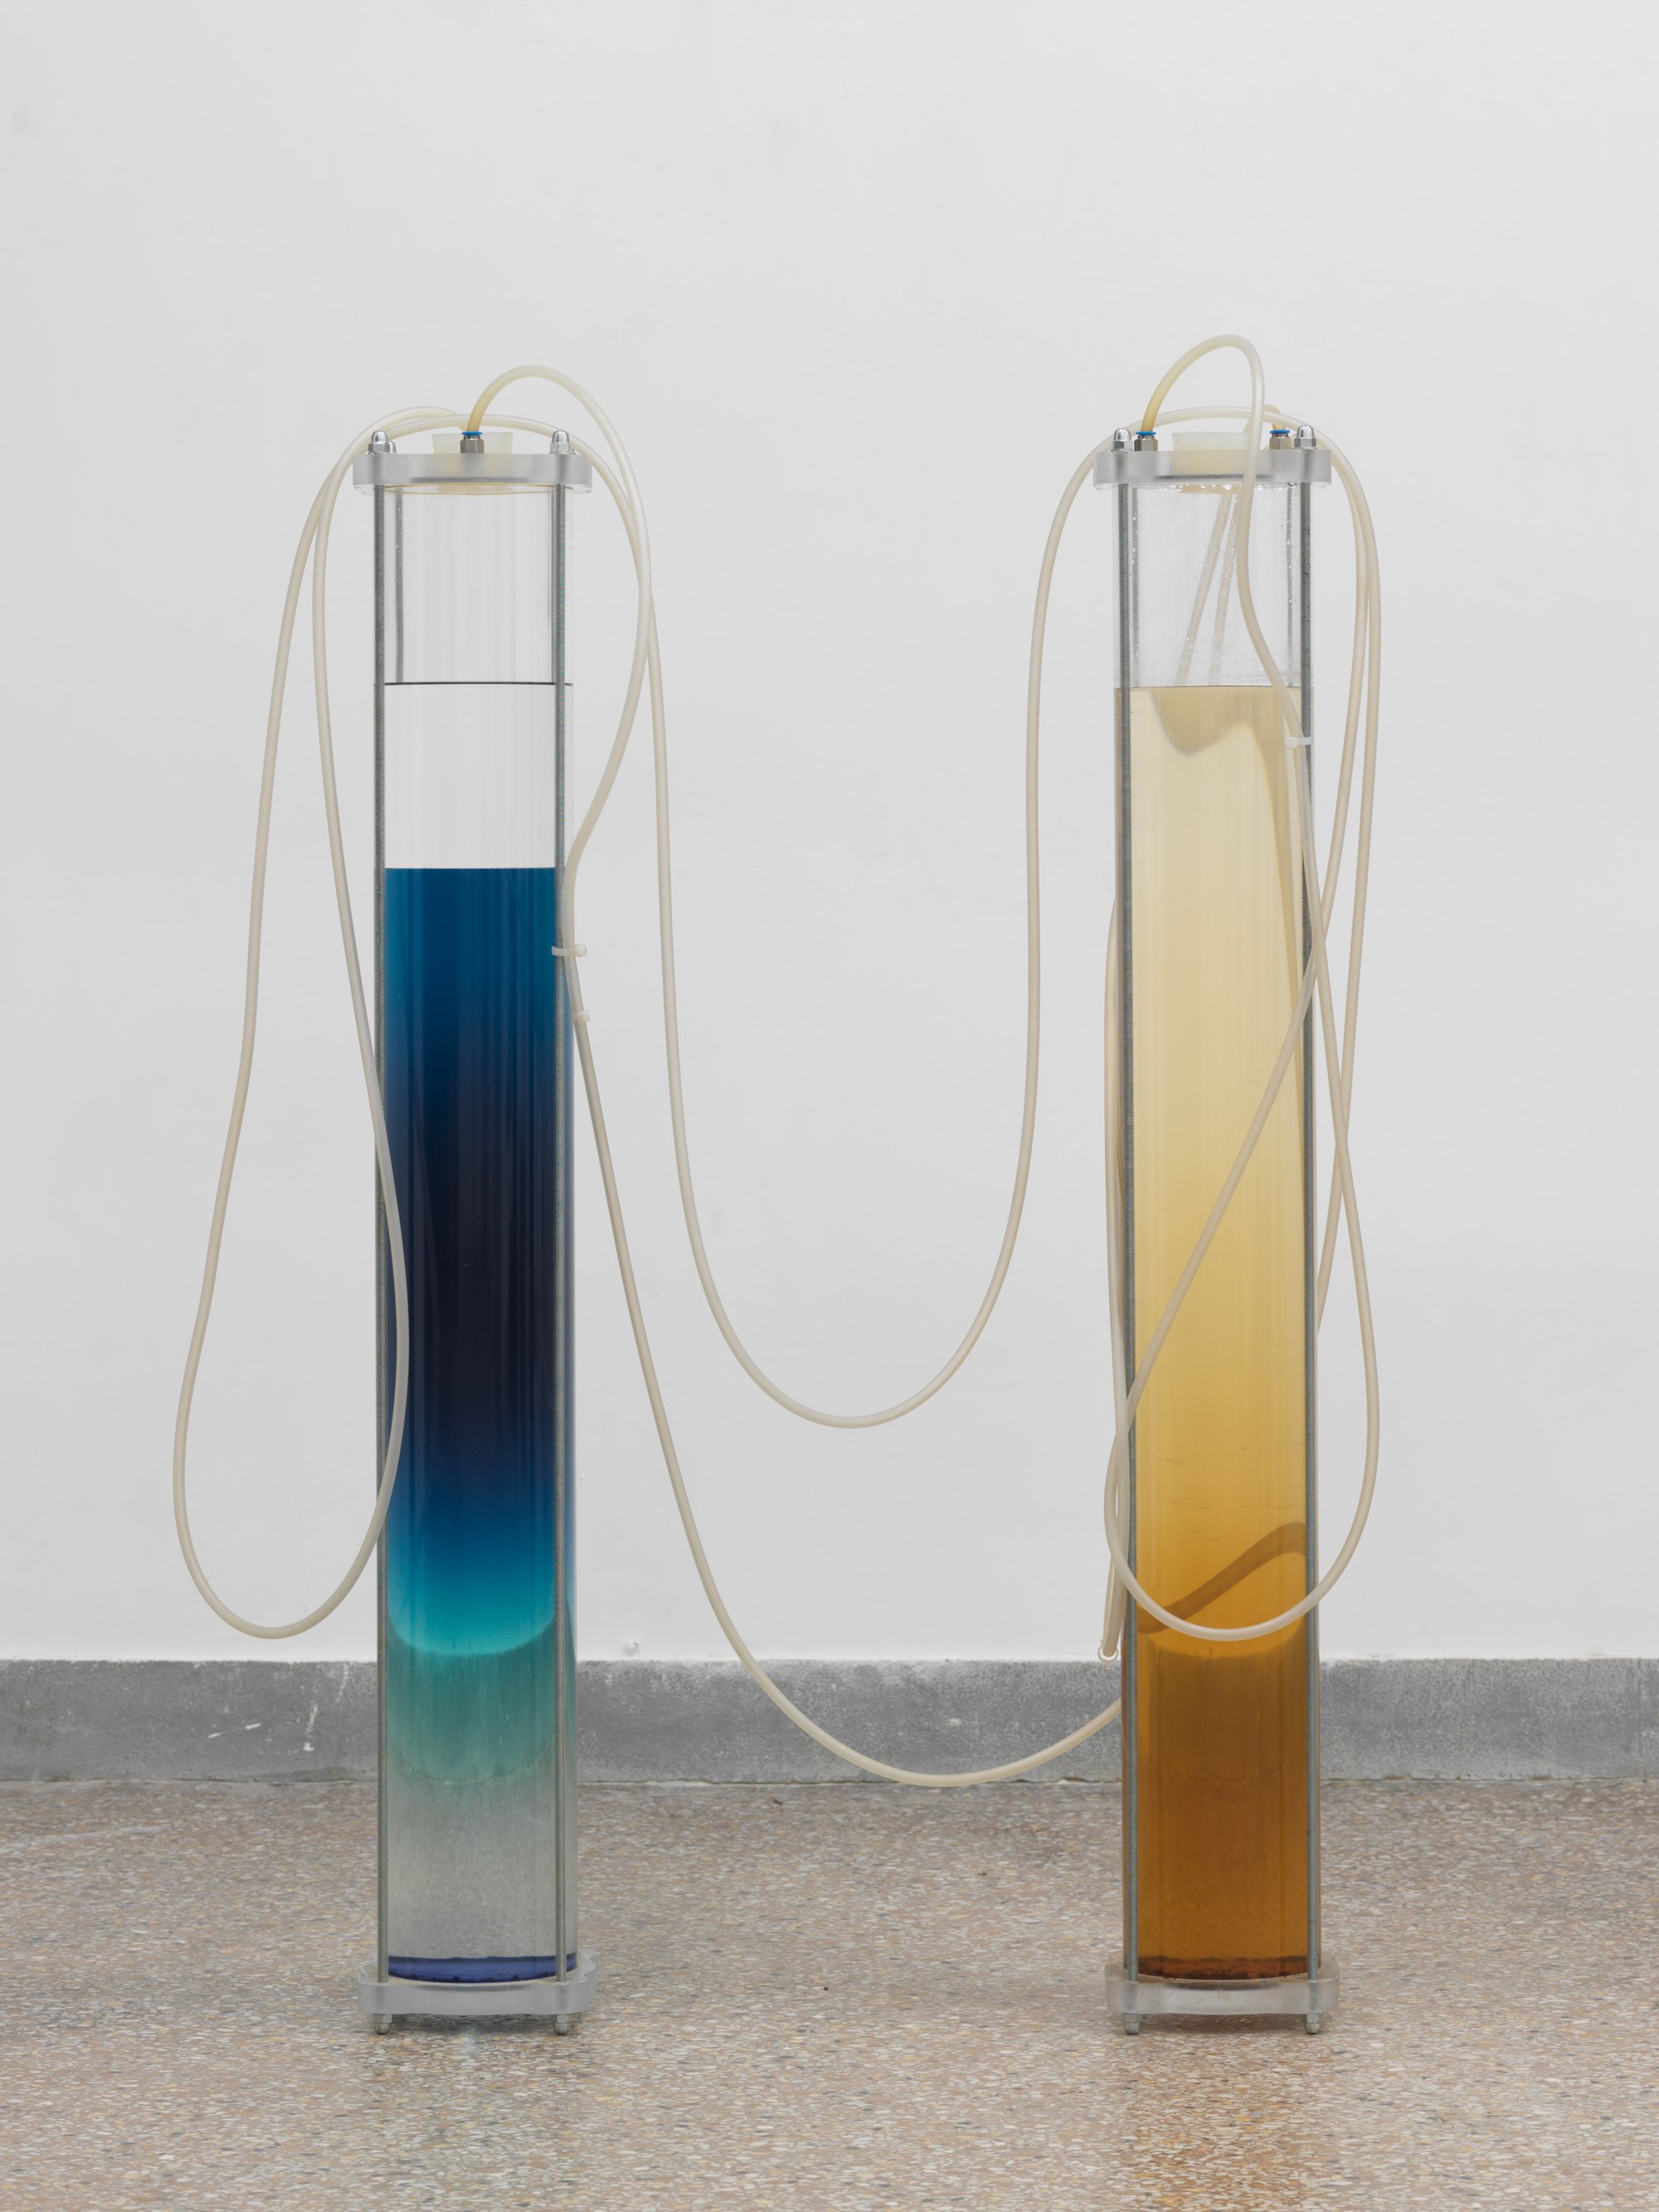 Iris Touliatou, Exhausted Lovers, separated ink and paper extracts, water, glycerine, ethyl alcohol, perspex, steel, silicon tubes, pumps, 11 lt, 110 x 15 x 15 cm each, 2016. Installation view, The Way In, Haus N Athen, Athens, 2021